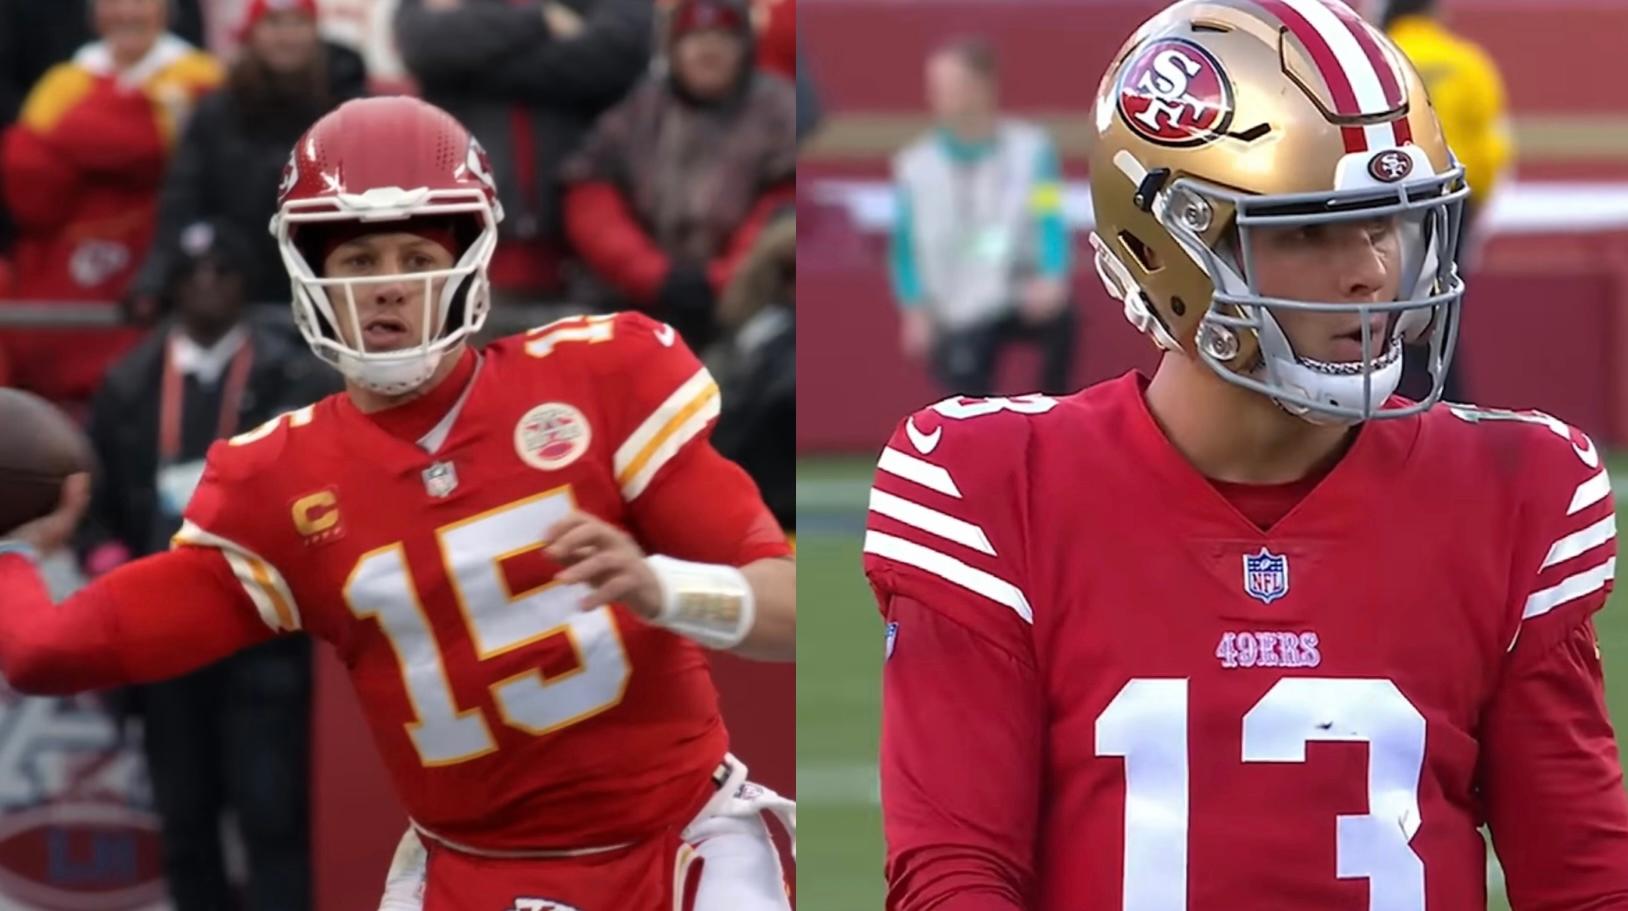 The Patrick Mahomes comparisons have begun for San Francisco 49ers star Brock Purdy ahead of Super Bowl LVIII